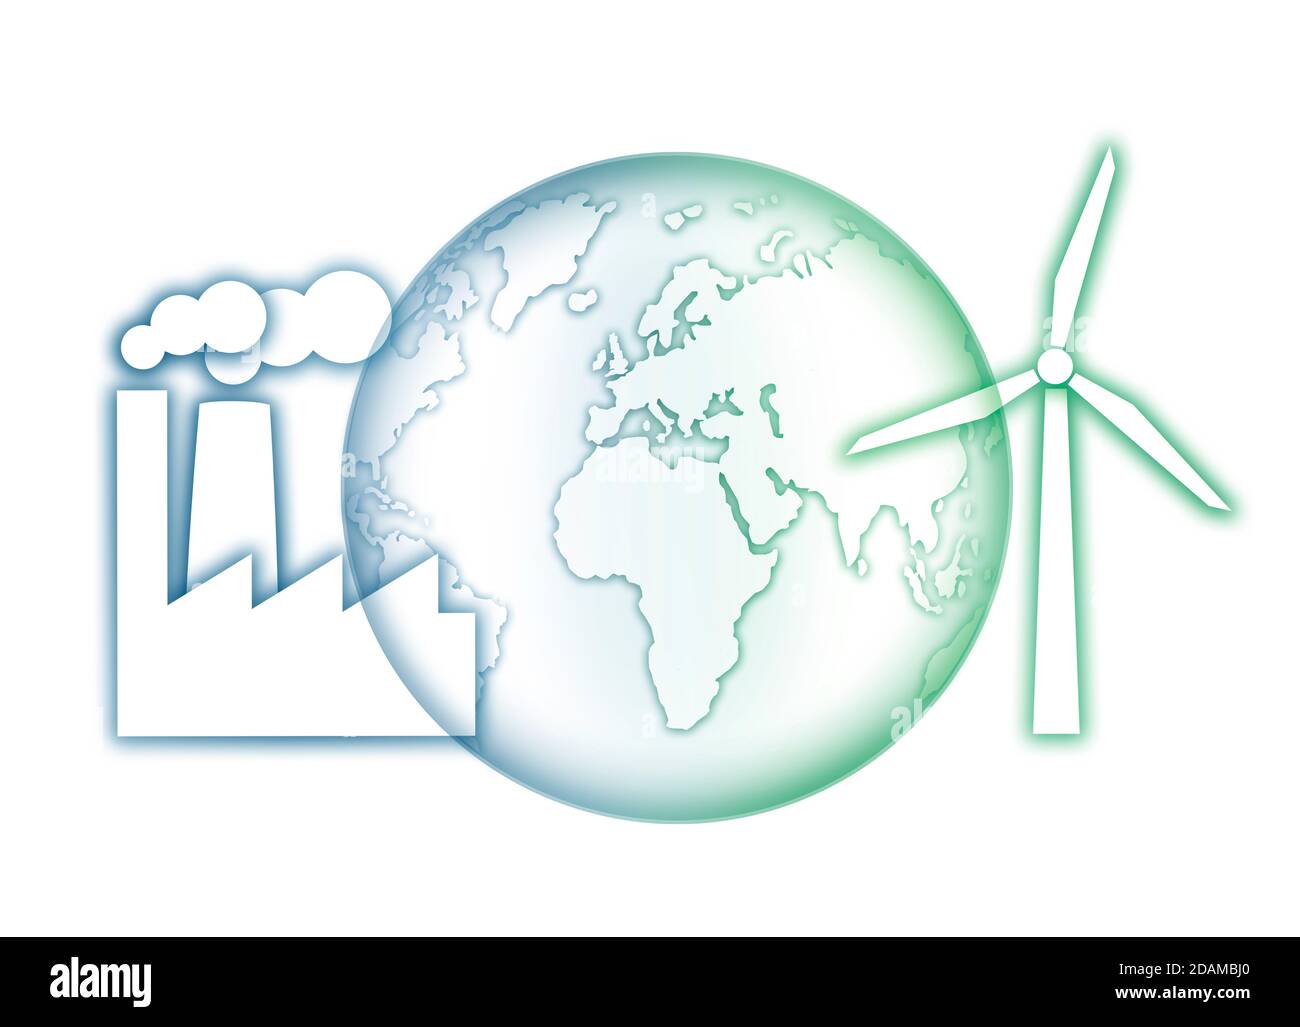 Earth with power station and wind turbine, illustration. Stock Photo